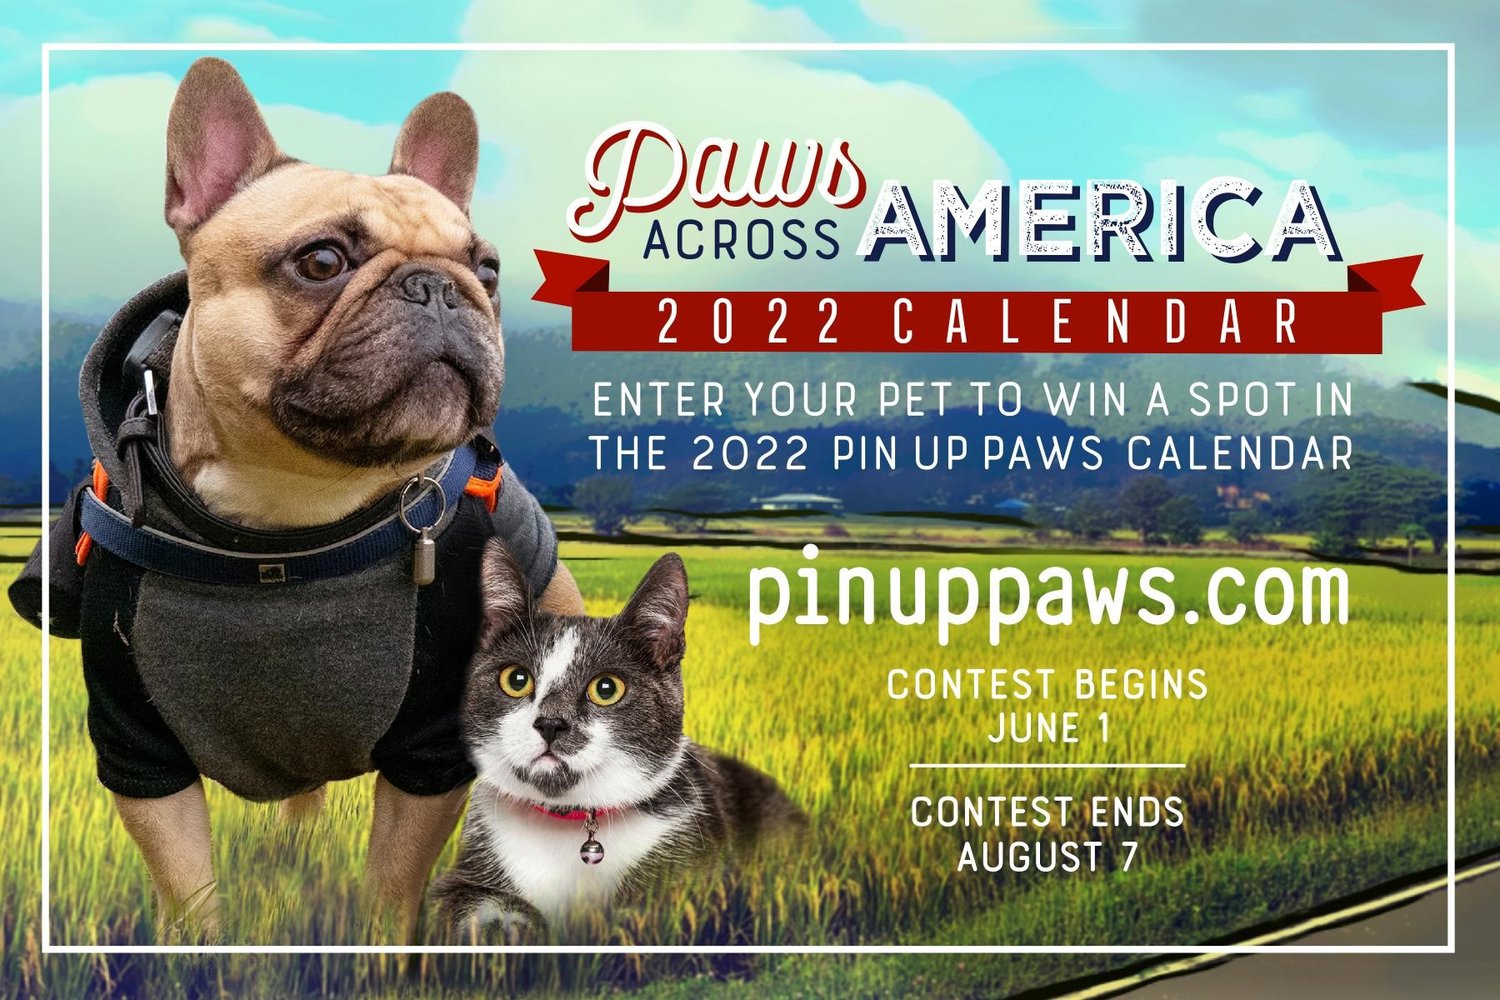 The St. Augustine Humane Society has launched its 11th annual “Pin Up Paws” pet calendar photo contest. The winner will be featured on the cover of the 2022 Pin Up Paws Calendar.